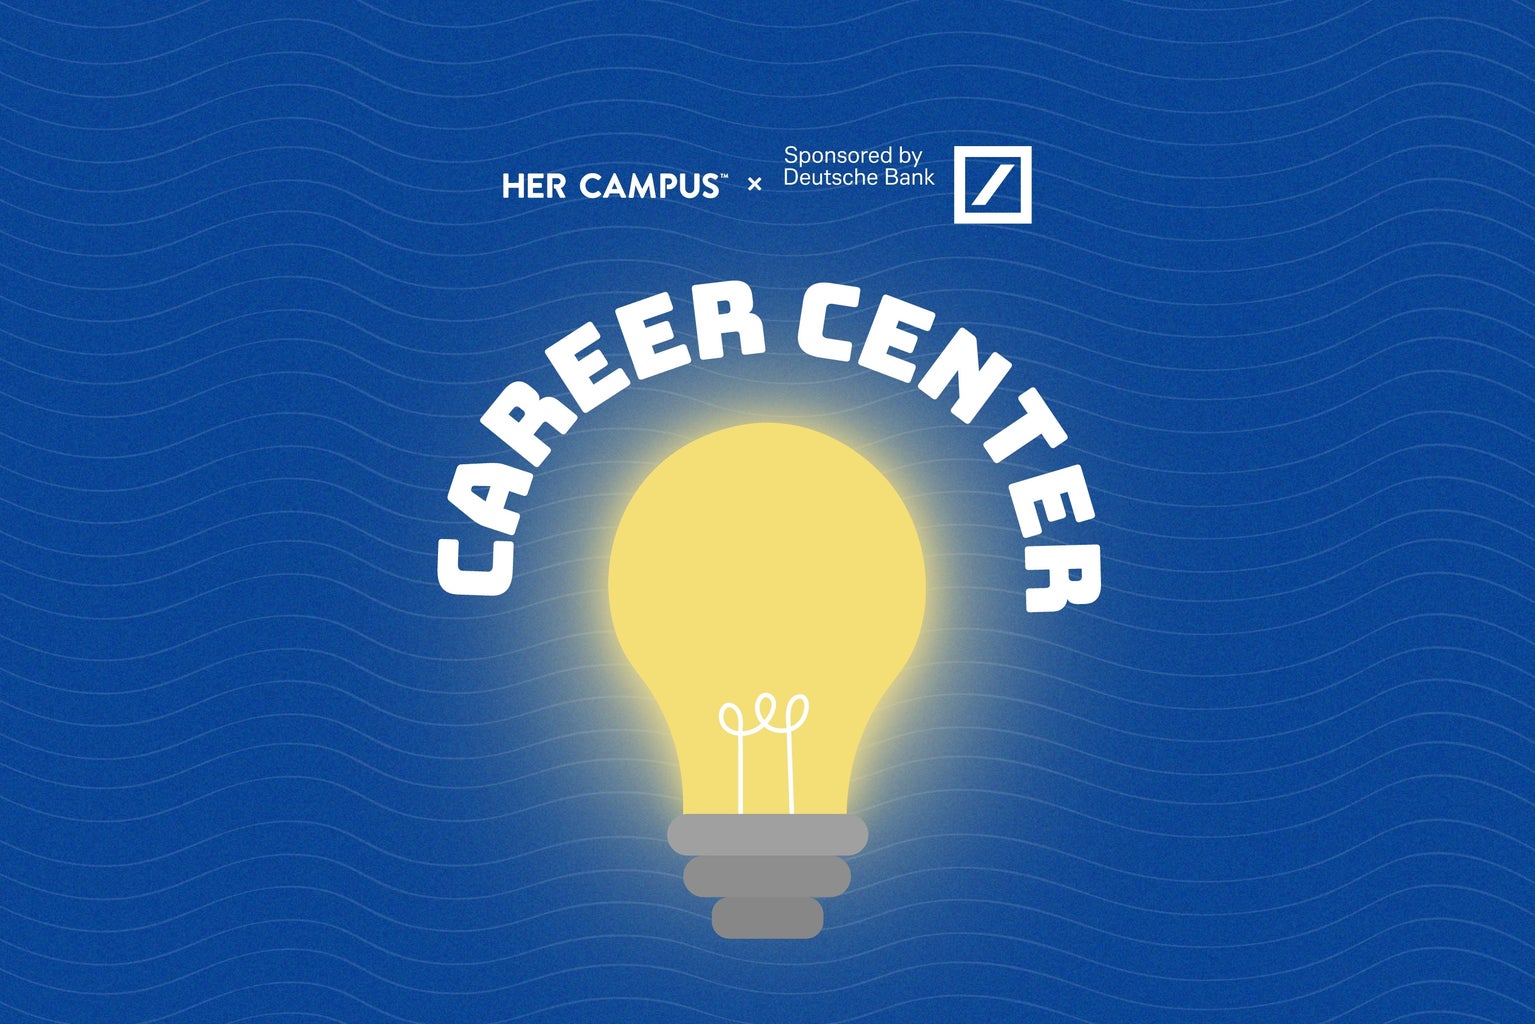 DB CareerCenter Hero?width=1024&height=1024&fit=cover&auto=webp